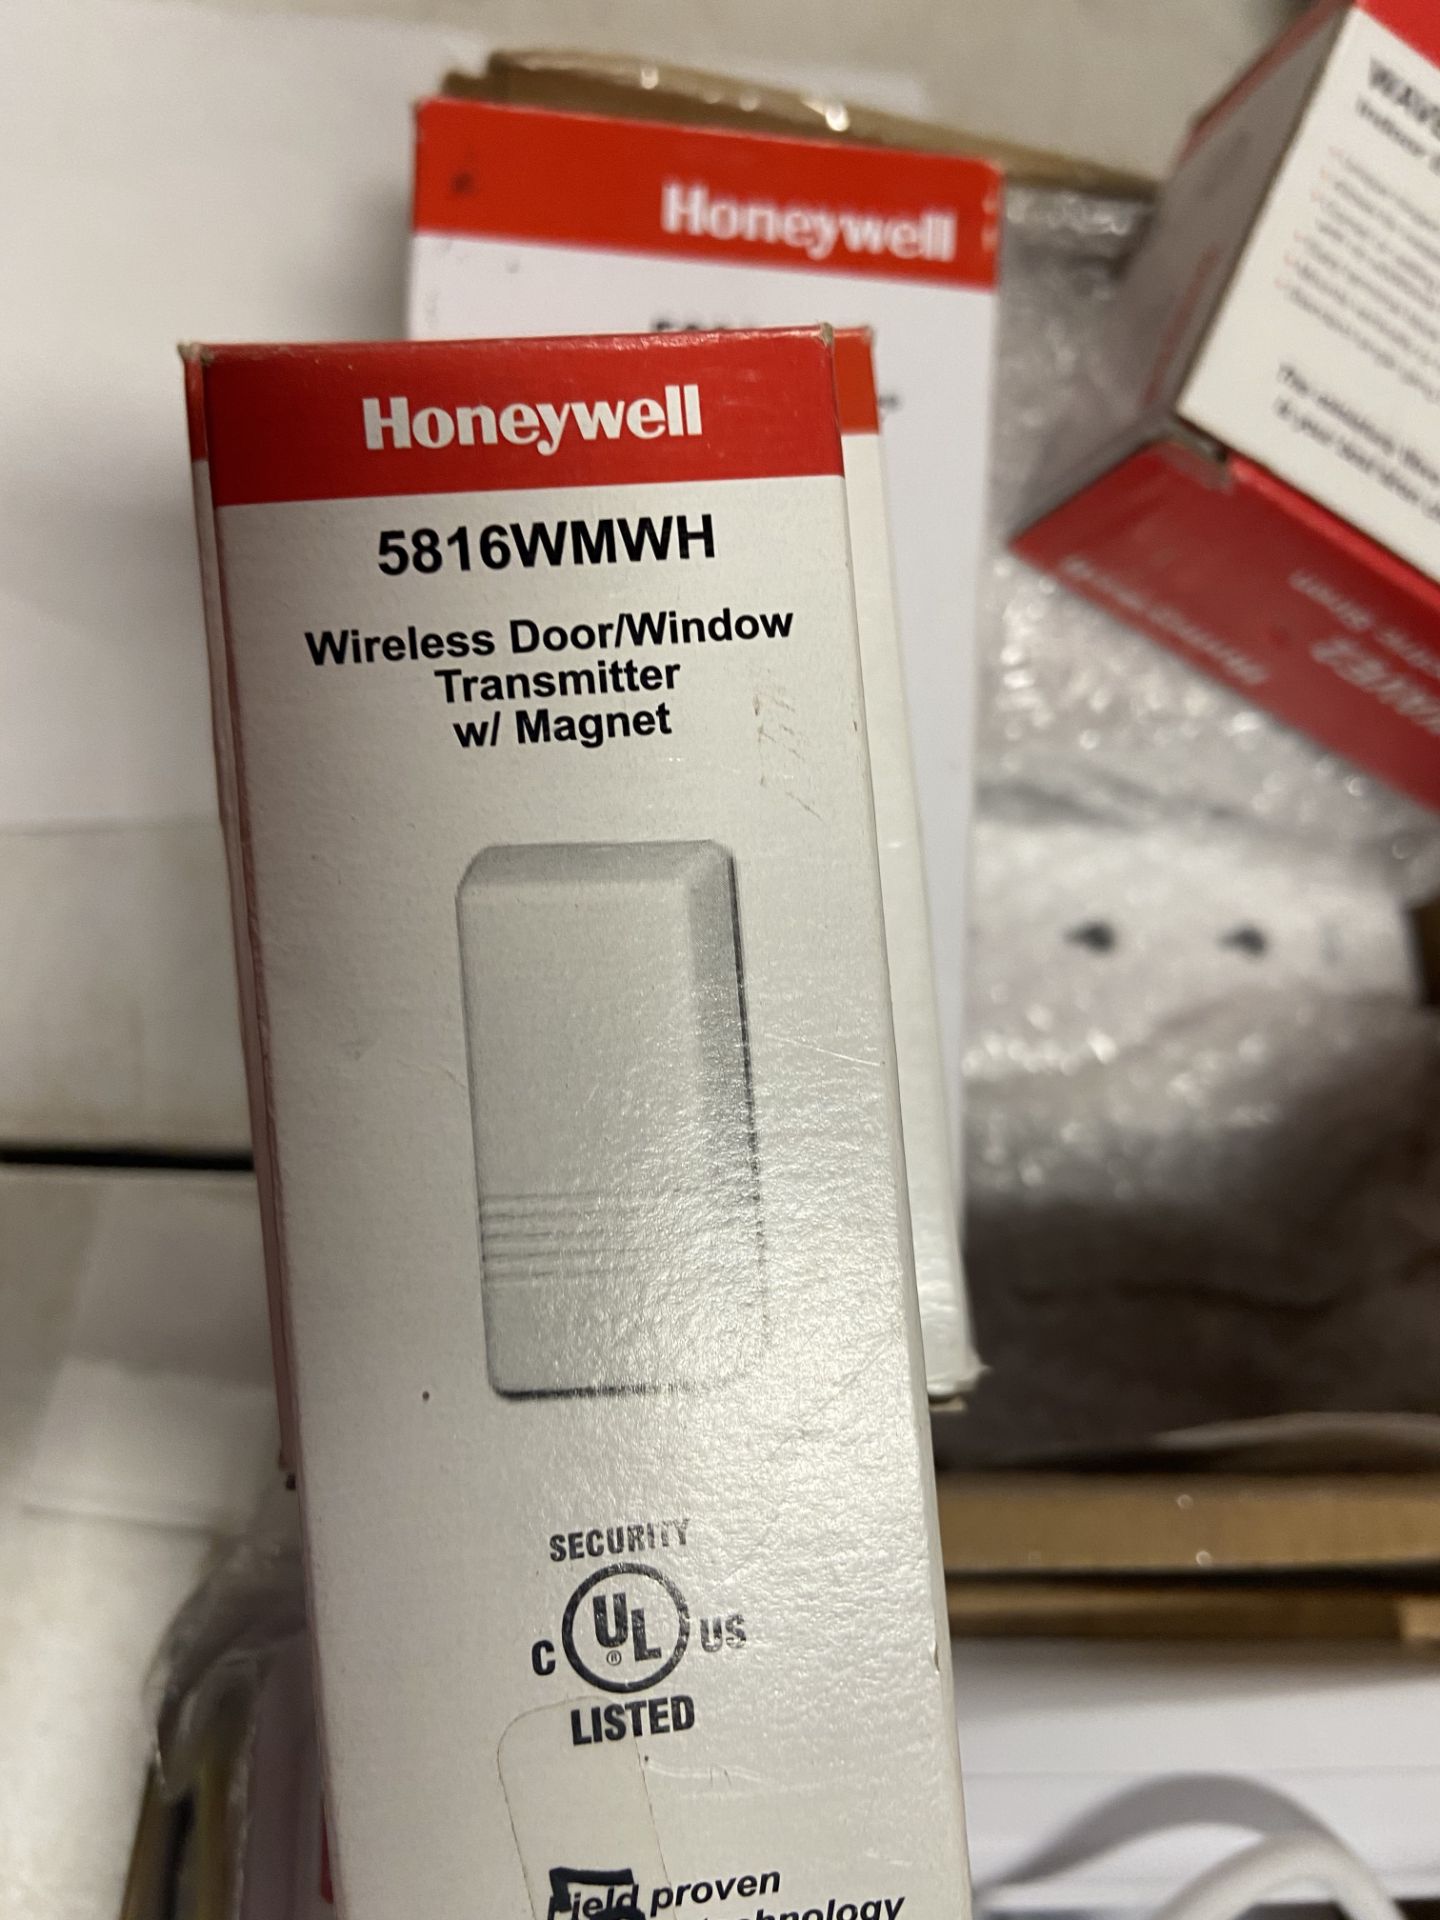 Miscellaneous Honeywell Security Products and Ethernet Surge Protectors (All Pictured), Rigging Fee: - Image 5 of 8